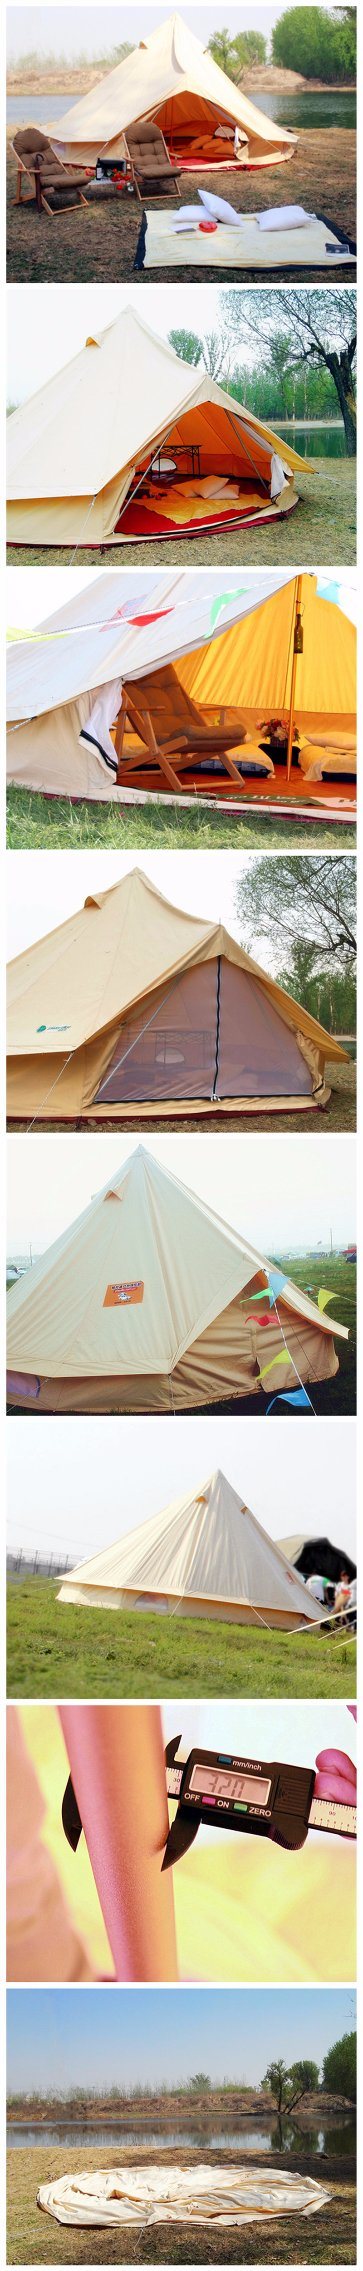 6m Bell Tent Zipped in Groundsheet by Life Under Canvas. 100% Cotton Canvas. Large Family Tent. Bell Tent for Camping. Excellent Value Camping Tent